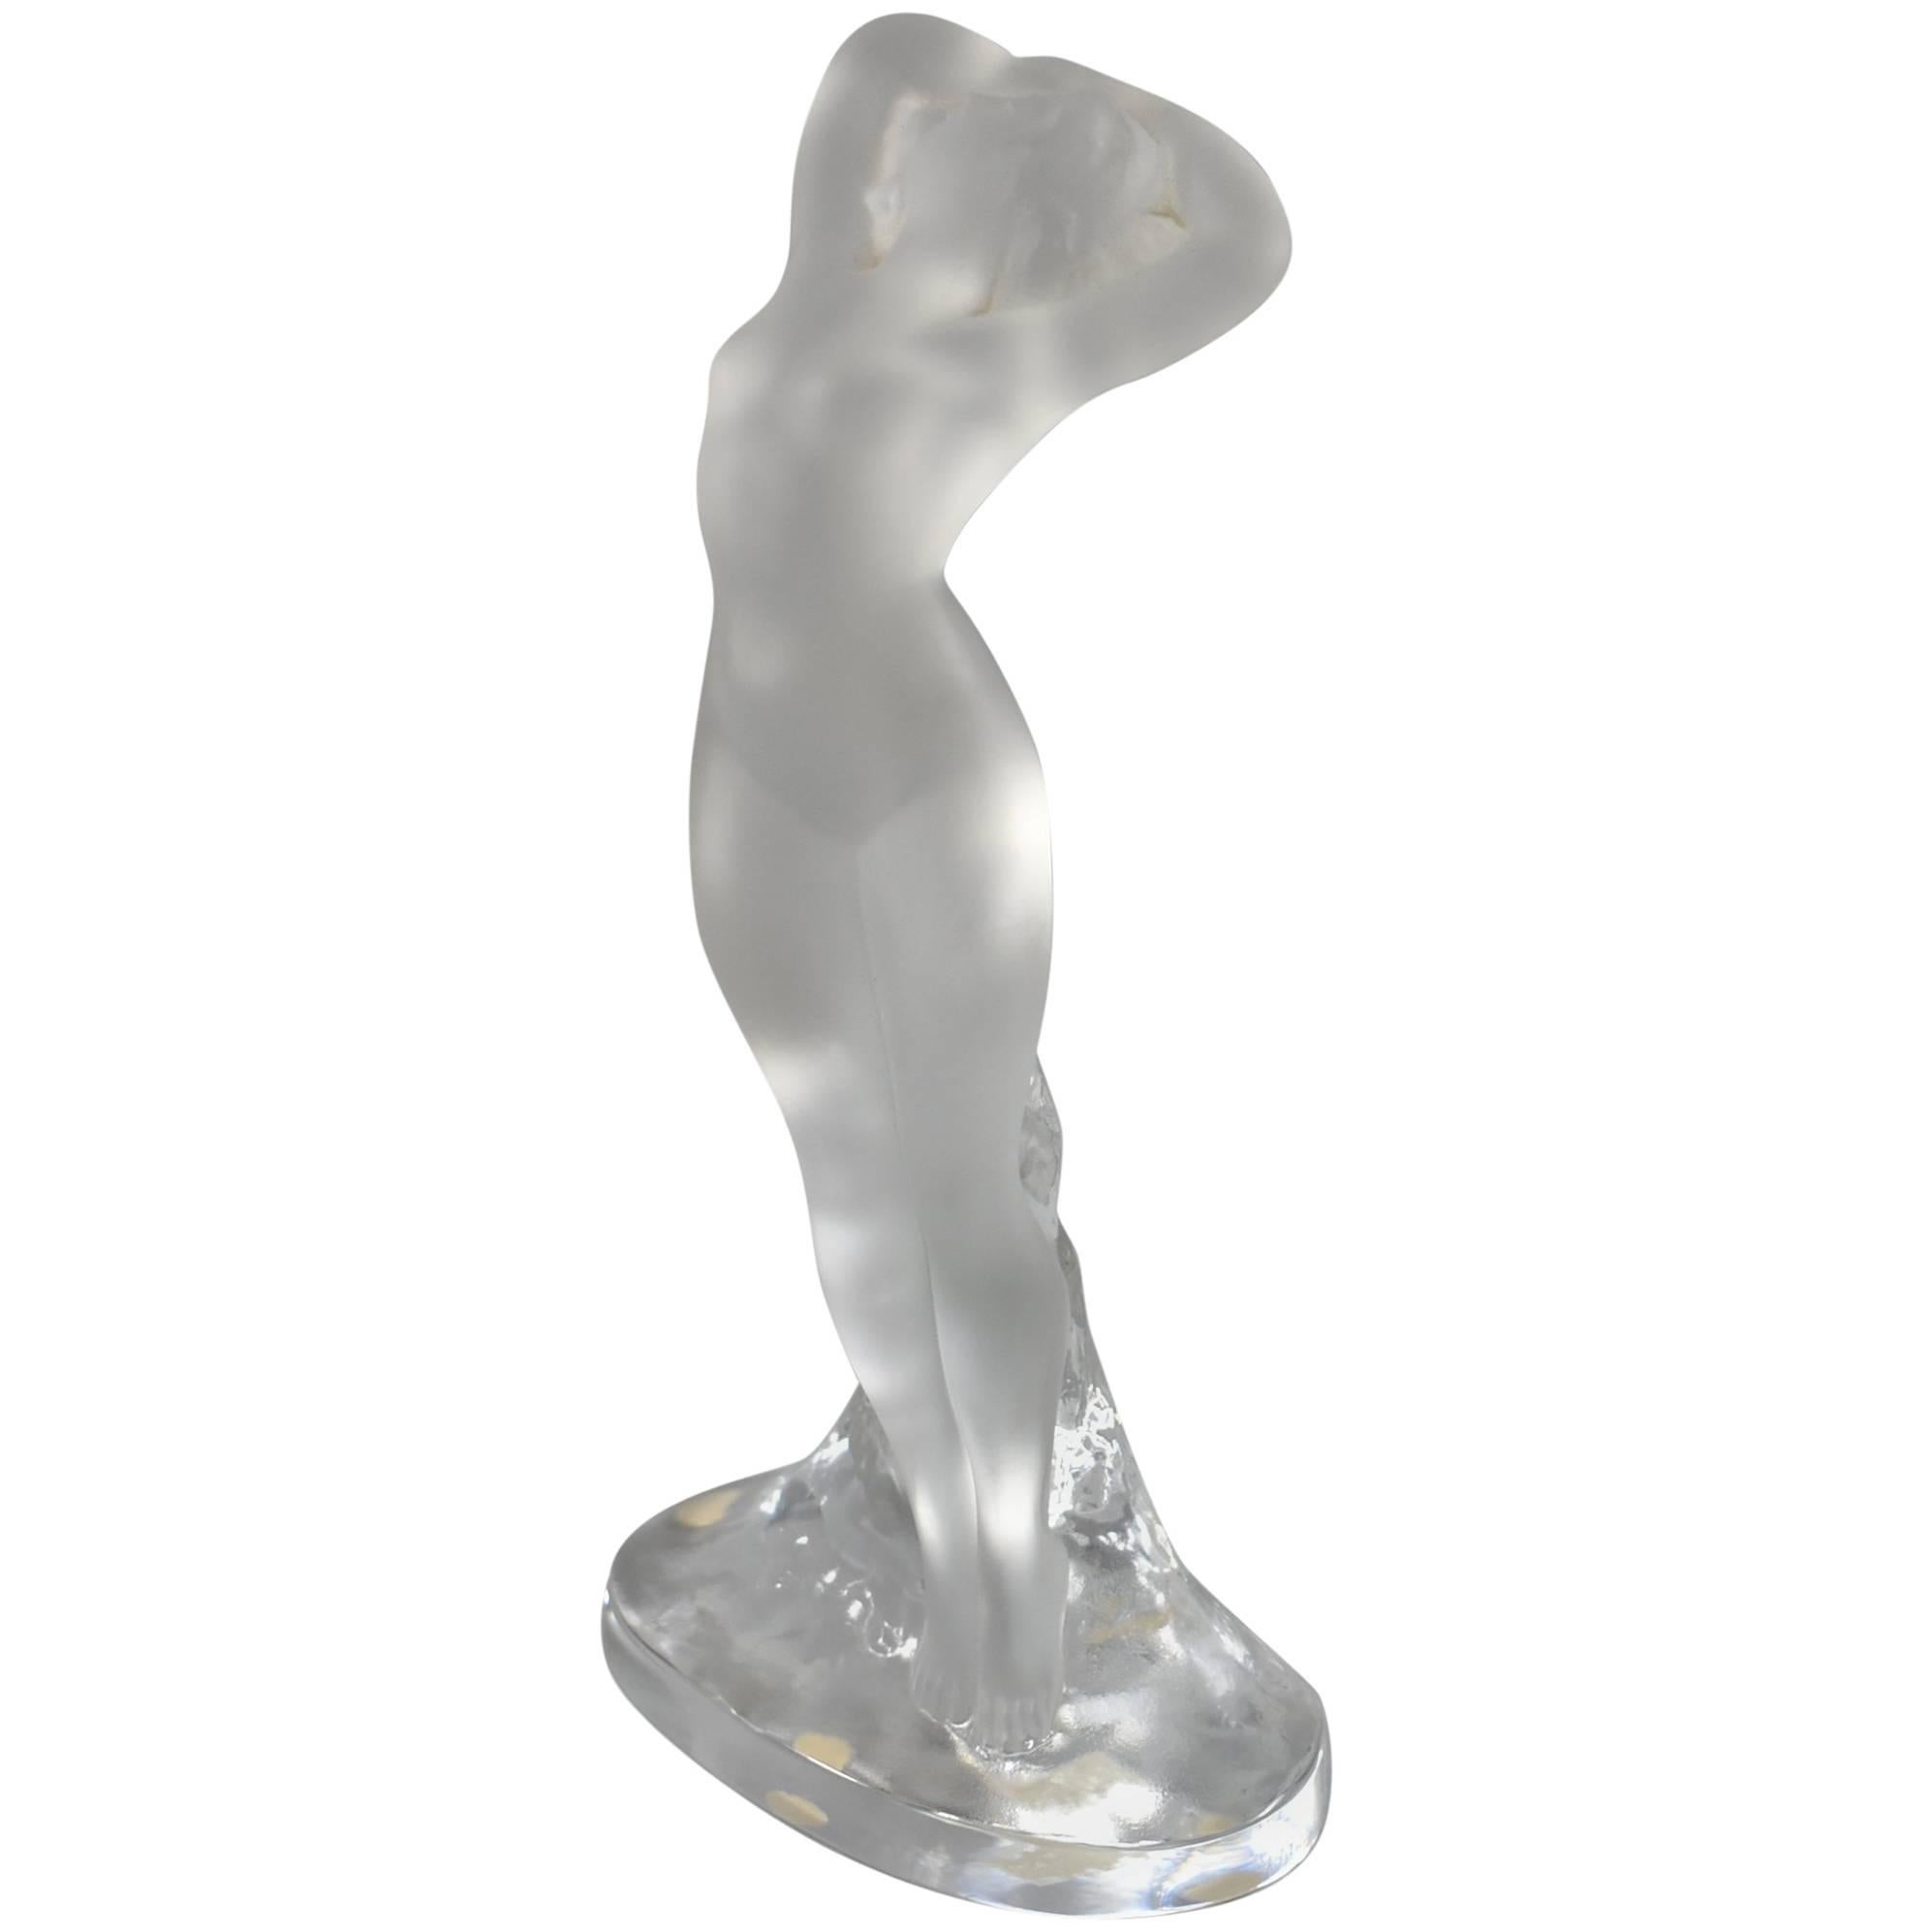 Signed Frosted Glass Art Deco Nude "Danseur" Female Figurine by Lalique